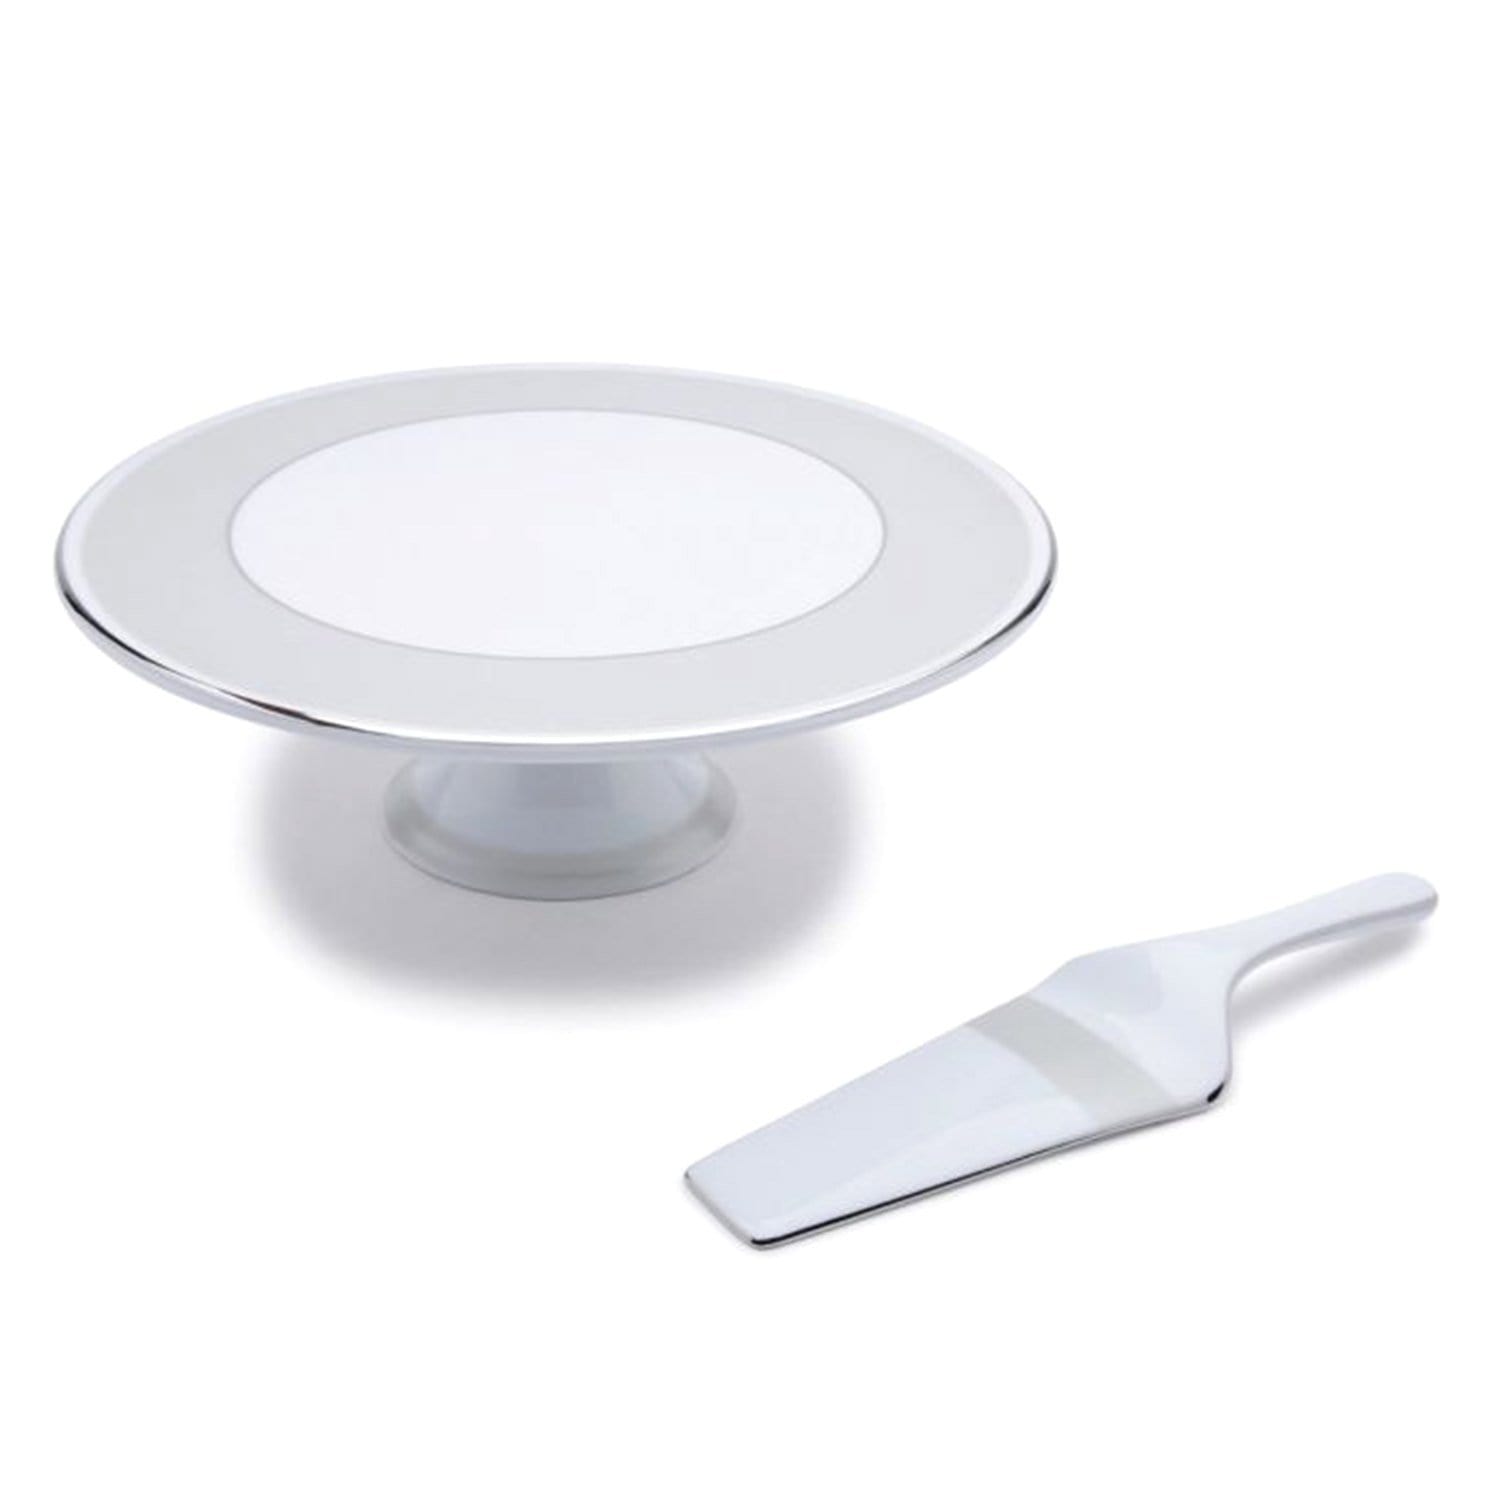 Dankotuwa Silver Mix Cake Stand with Cake Server - White and Silver - CAKE S - Jashanmal Home